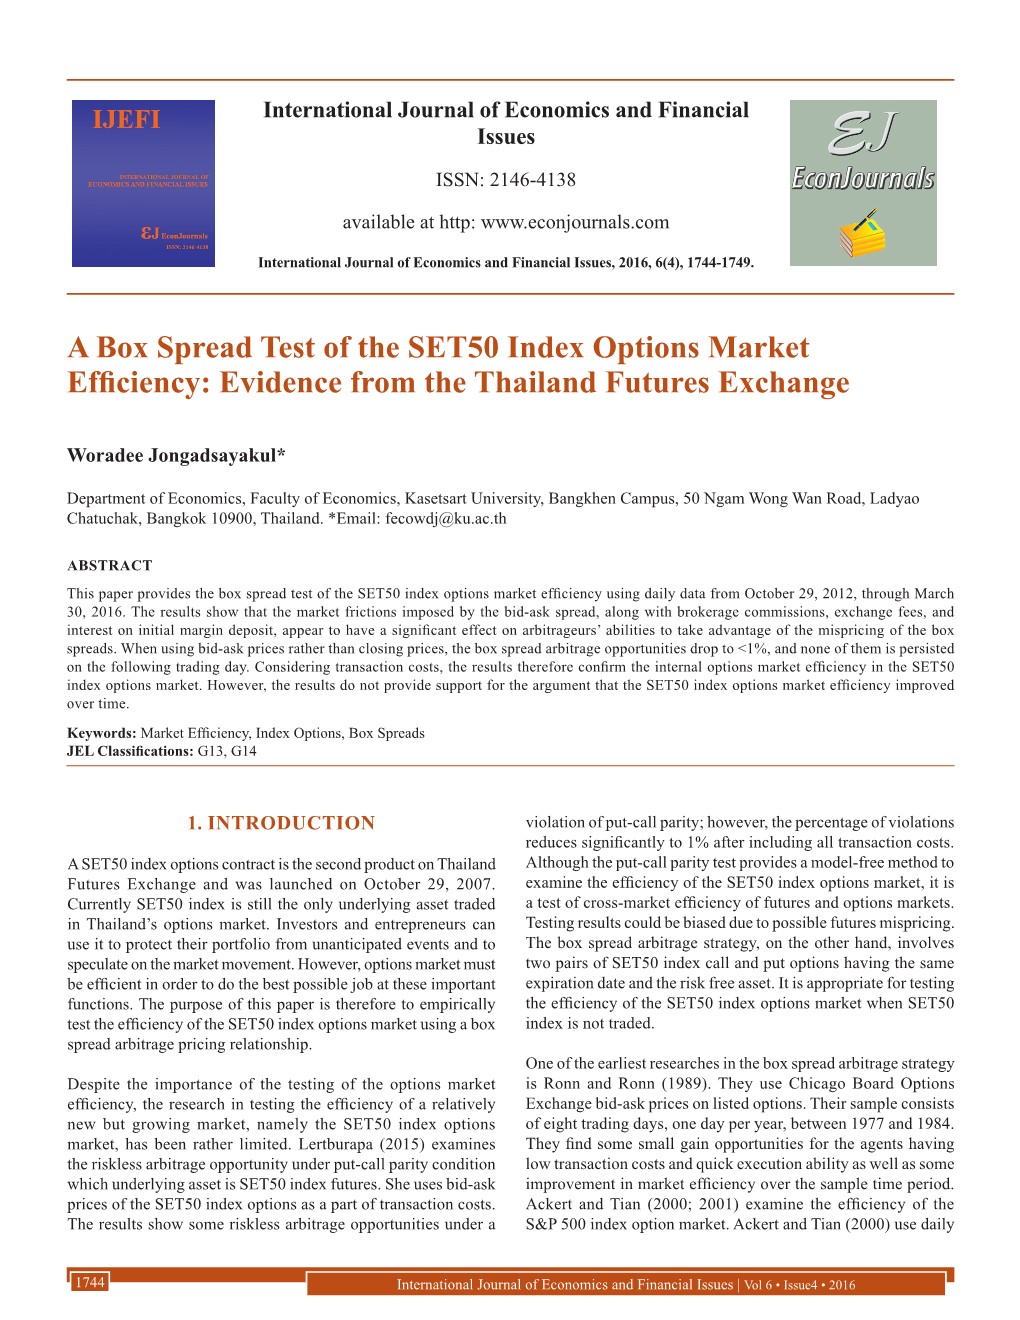 A Box Spread Test of the SET50 Index Options Market Efficiency: Evidence from the Thailand Futures Exchange